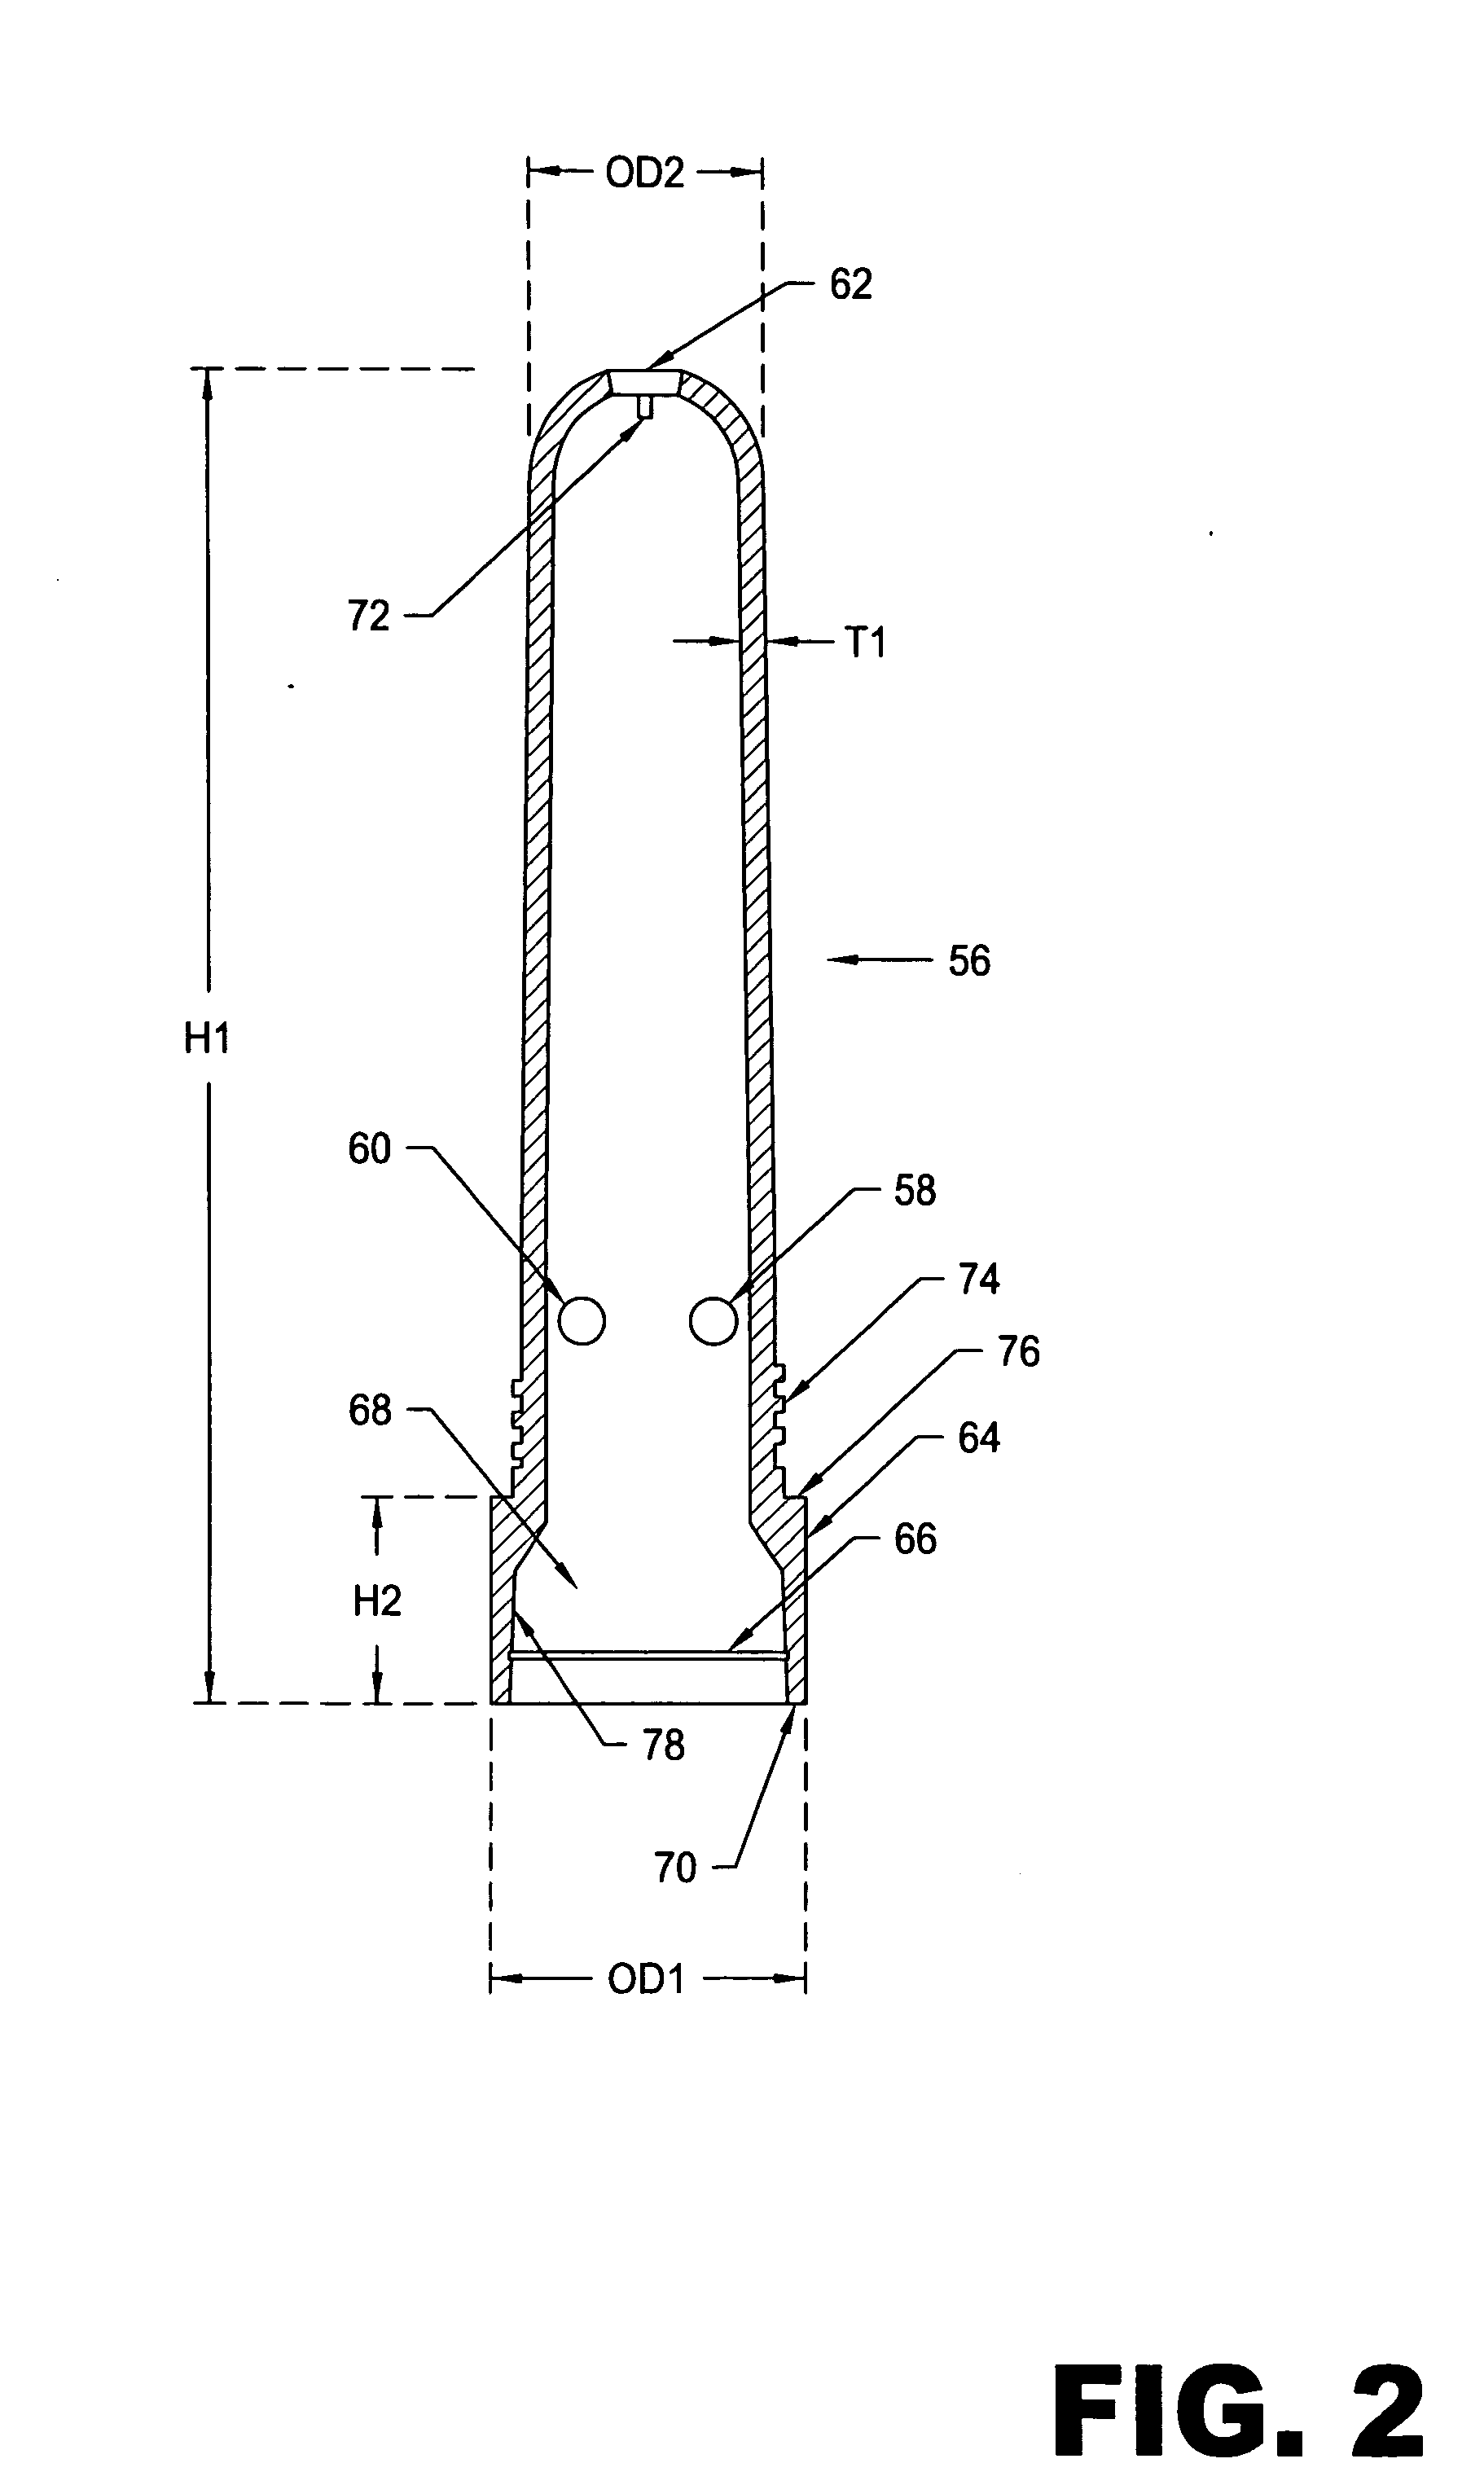 Methods and apparatus to prevent, treat, and cure the symptoms of nausea caused by chemotherapy treatments of human cancers